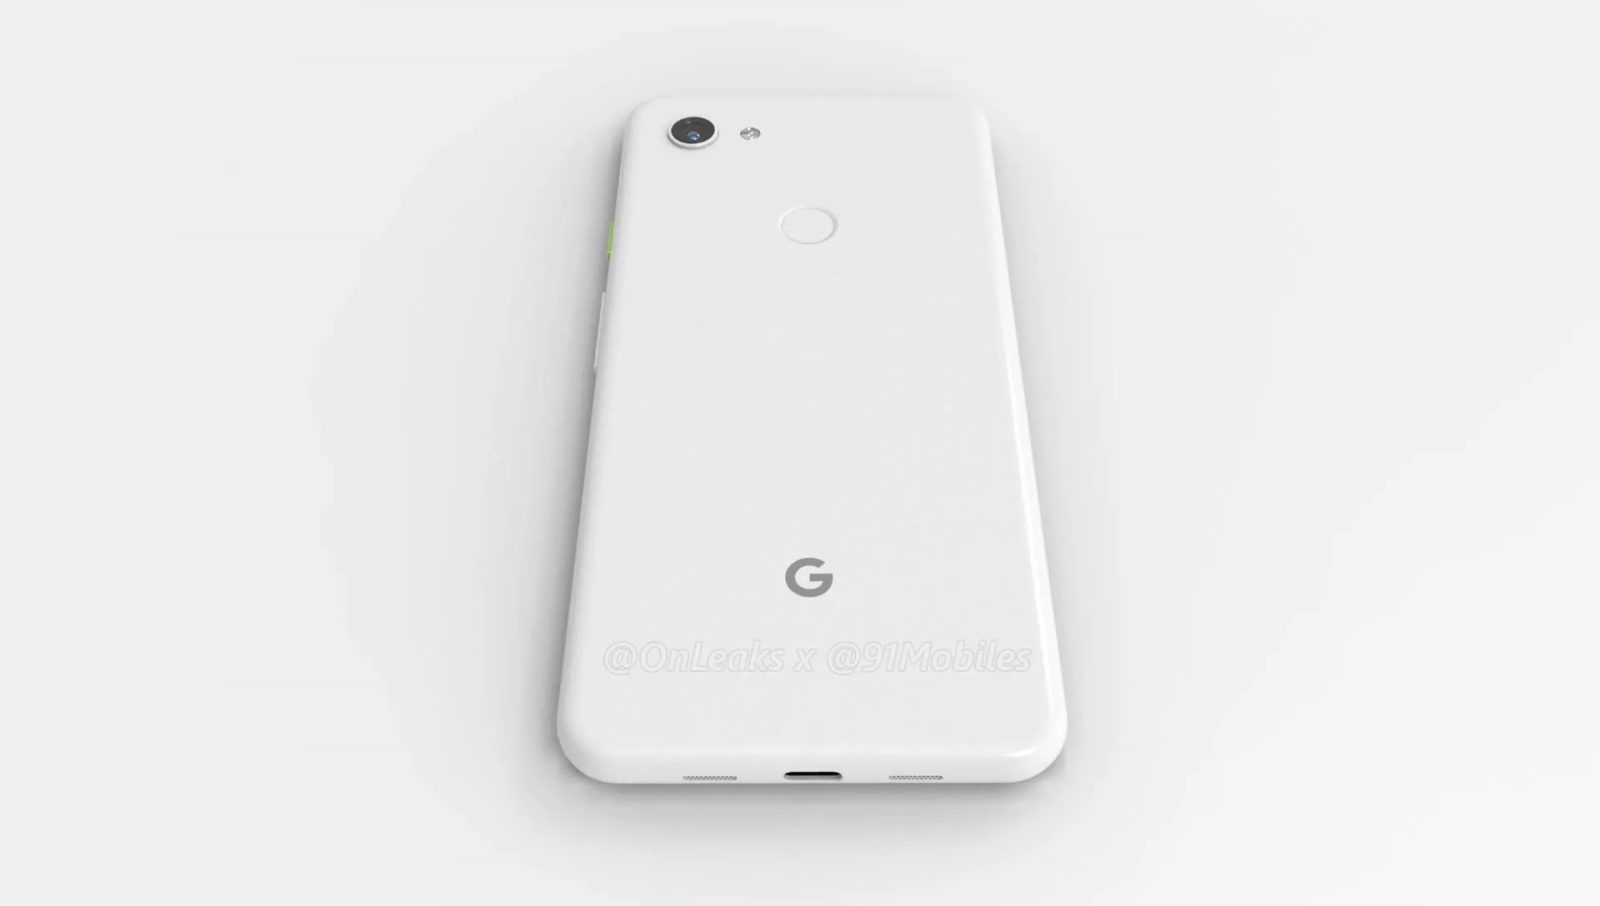 Google Pixel 3a and Pixel 3a XL specs, explained - 9to5Google